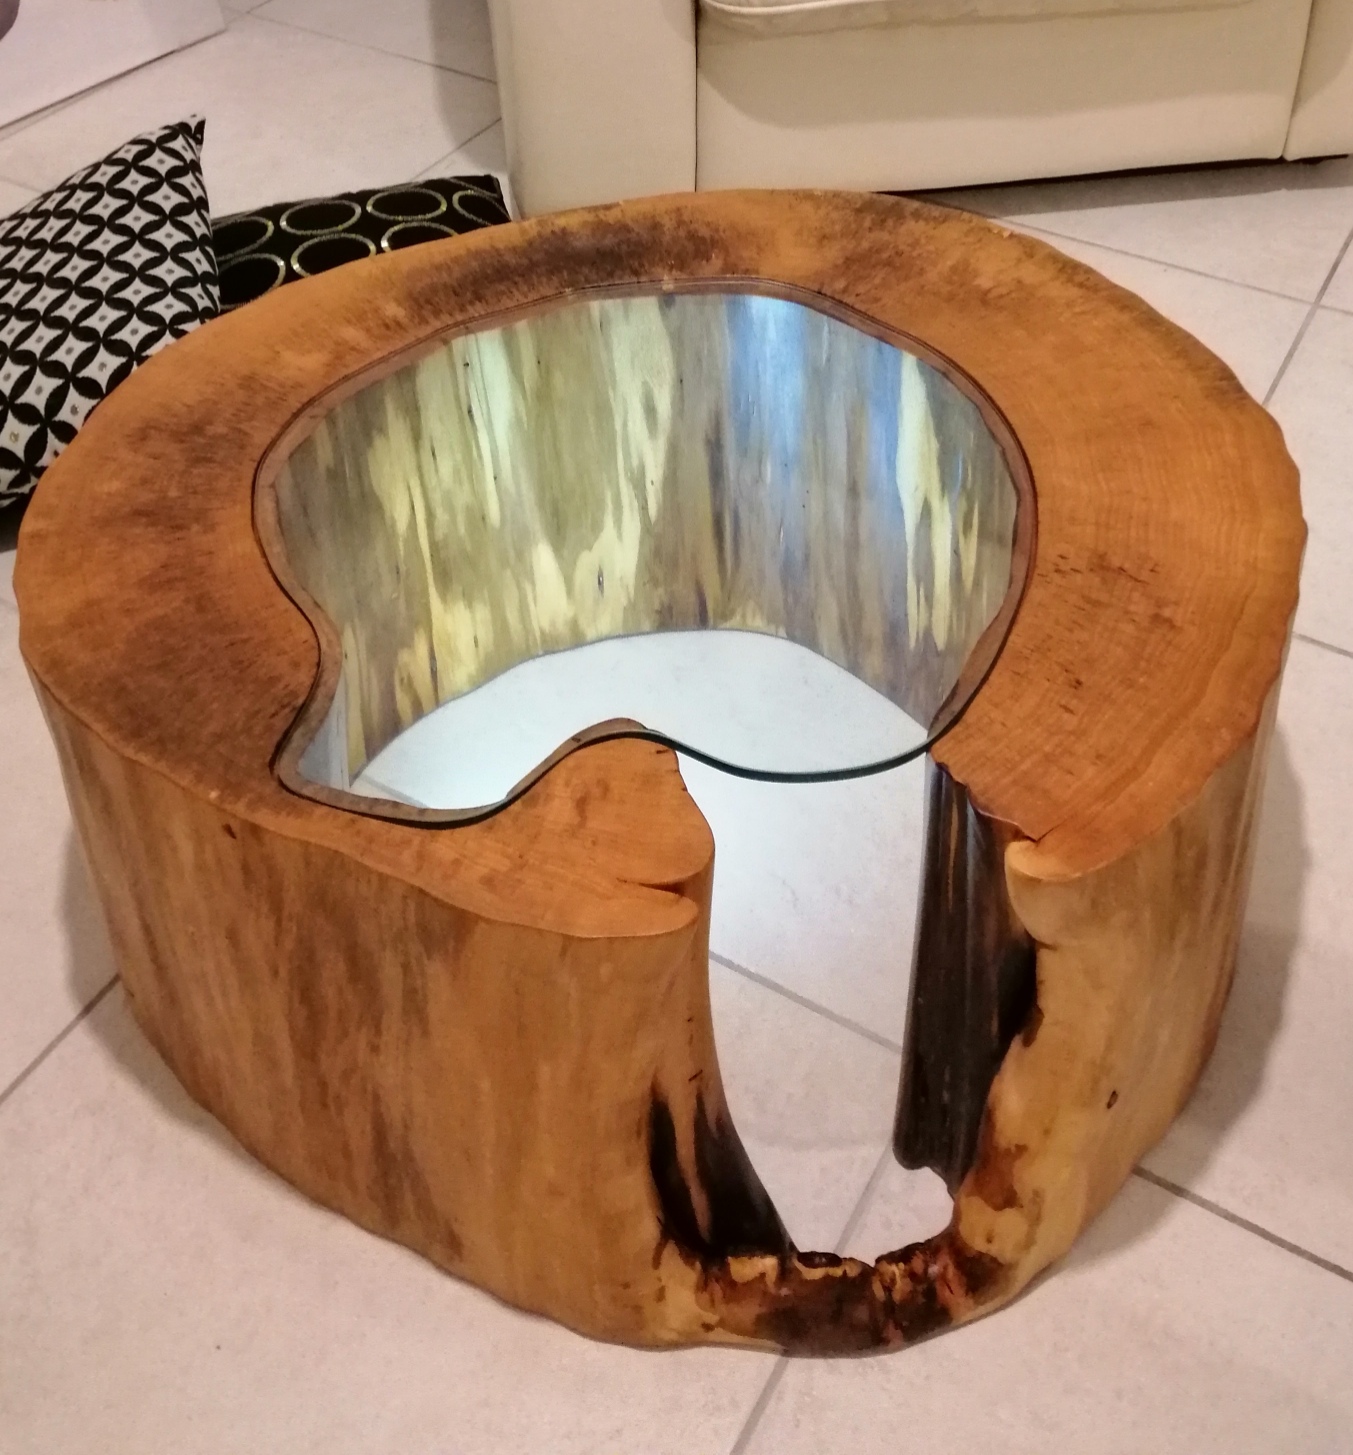 A wooden table made from a trunk of an ancient oak and a tempered glass resting on it. A simple but elegant style makes it unique.